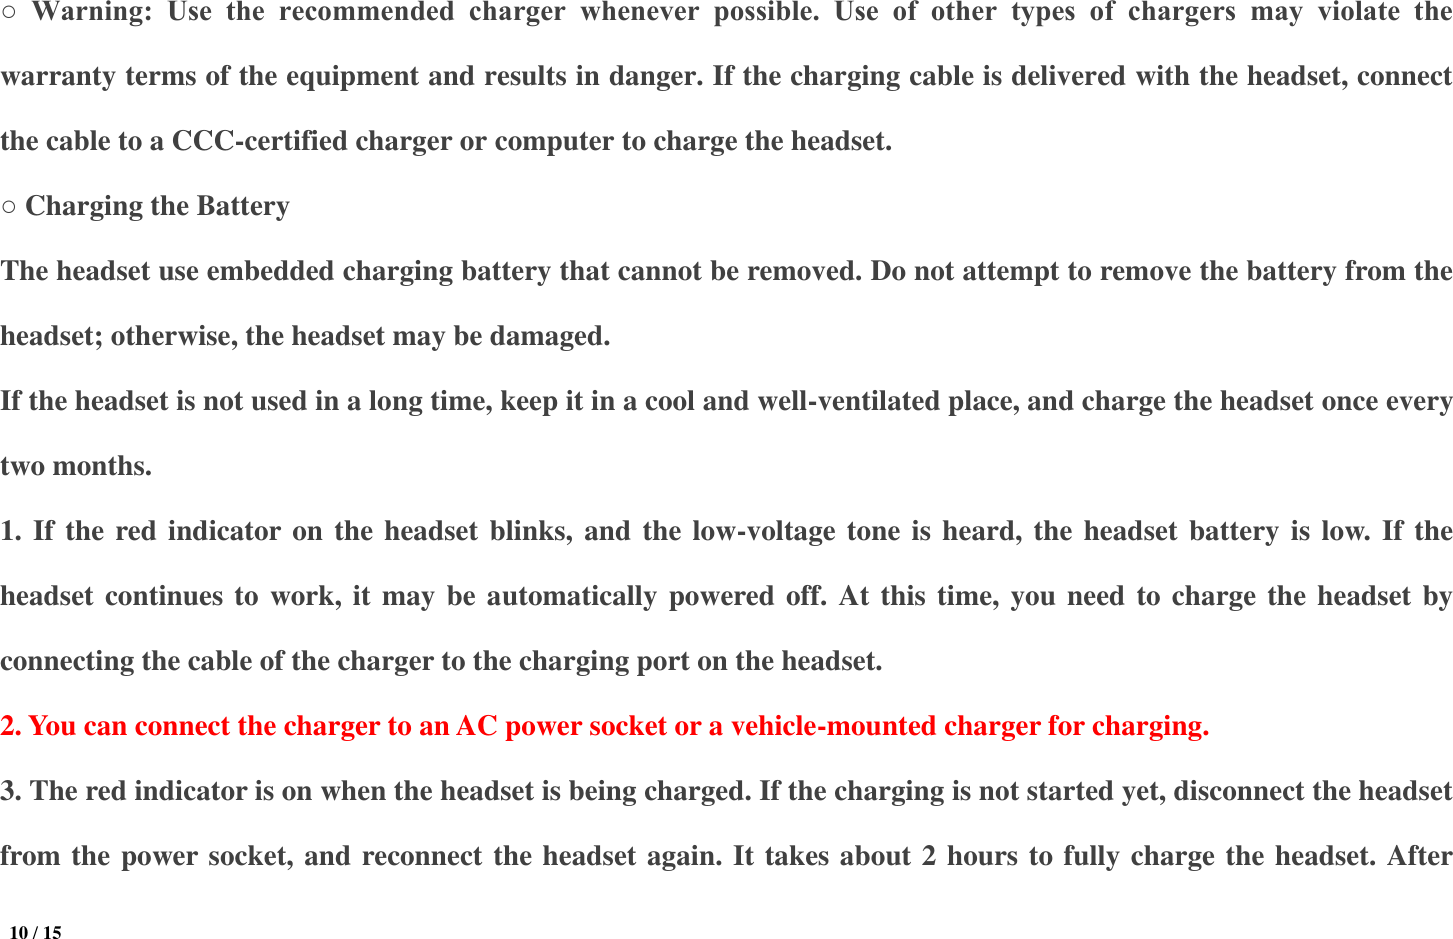  10 / 15  ○  Warning:  Use  the  recommended  charger  whenever  possible.  Use  of  other  types  of  chargers  may  violate  the warranty terms of the equipment and results in danger. If the charging cable is delivered with the headset, connect the cable to a CCC-certified charger or computer to charge the headset.   ○ Charging the Battery The headset use embedded charging battery that cannot be removed. Do not attempt to remove the battery from the headset; otherwise, the headset may be damaged.   If the headset is not used in a long time, keep it in a cool and well-ventilated place, and charge the headset once every two months.   1. If the red indicator on the headset blinks, and the low-voltage tone is heard, the headset battery is low. If the headset continues to work, it may be automatically powered off. At this time, you need to charge the headset by connecting the cable of the charger to the charging port on the headset.   2. You can connect the charger to an AC power socket or a vehicle-mounted charger for charging.   3. The red indicator is on when the headset is being charged. If the charging is not started yet, disconnect the headset from the power socket, and reconnect the headset again. It takes about 2 hours to fully charge the headset. After 